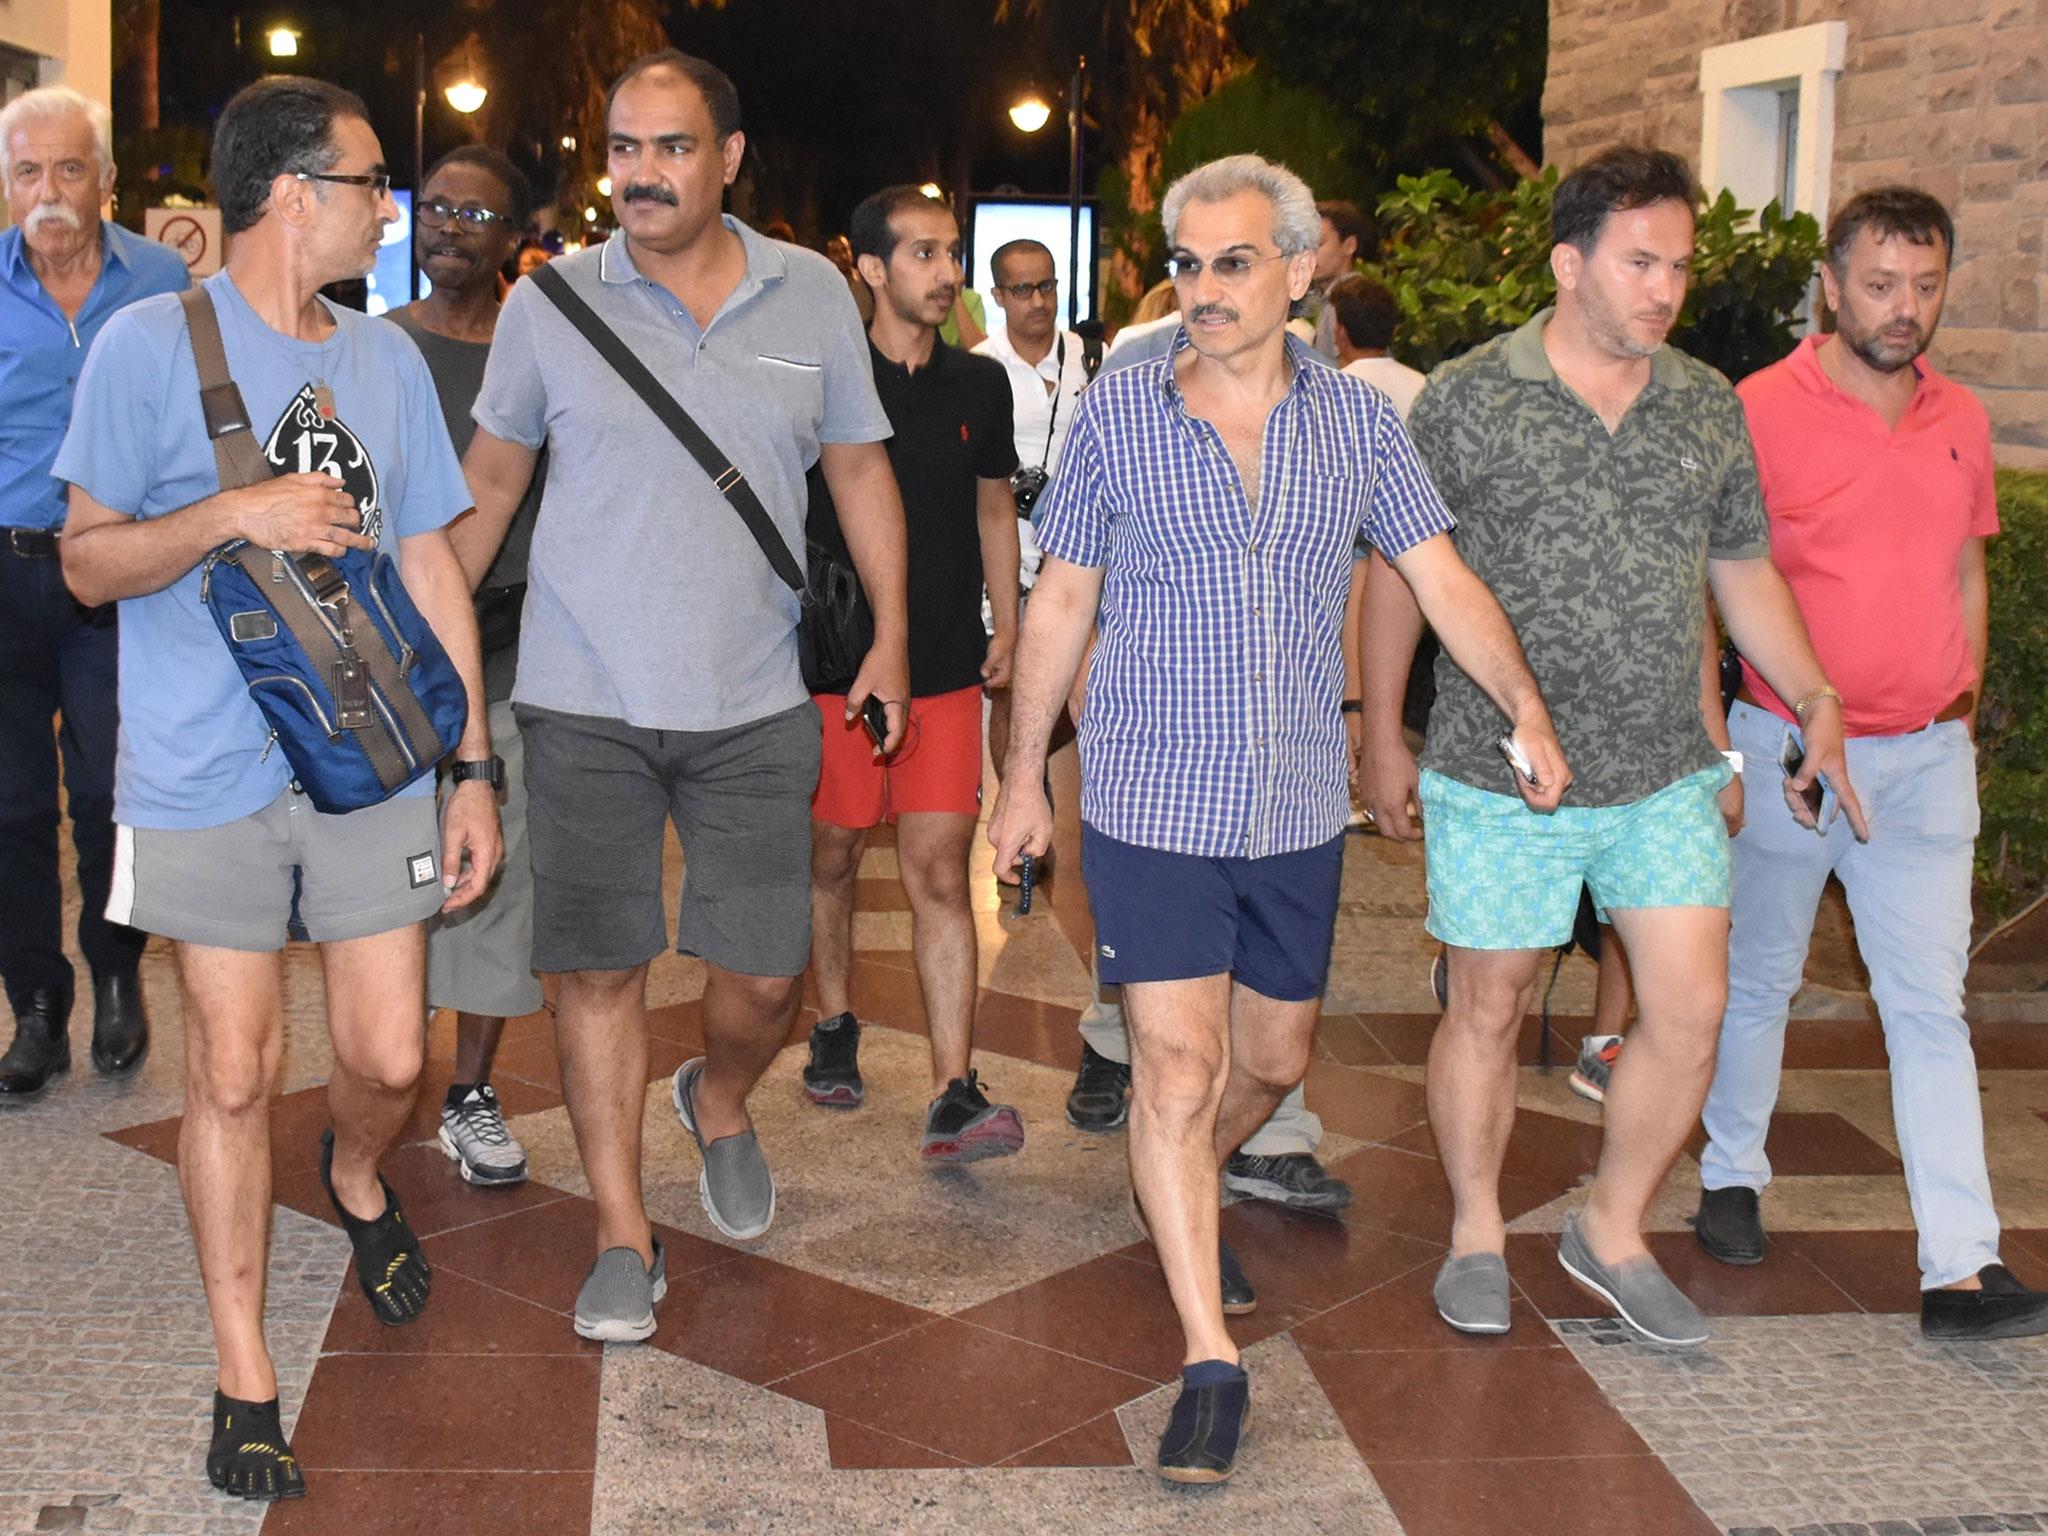 Saudi Prince Al-Waleed Bin Talal bin Abdulaziz al Saud (third on the right) arrives at a restaurant at Marina district with the advisor to the Turkish Prime Ministry, Taha Genc (second on the right) In Bodrum, Turkey